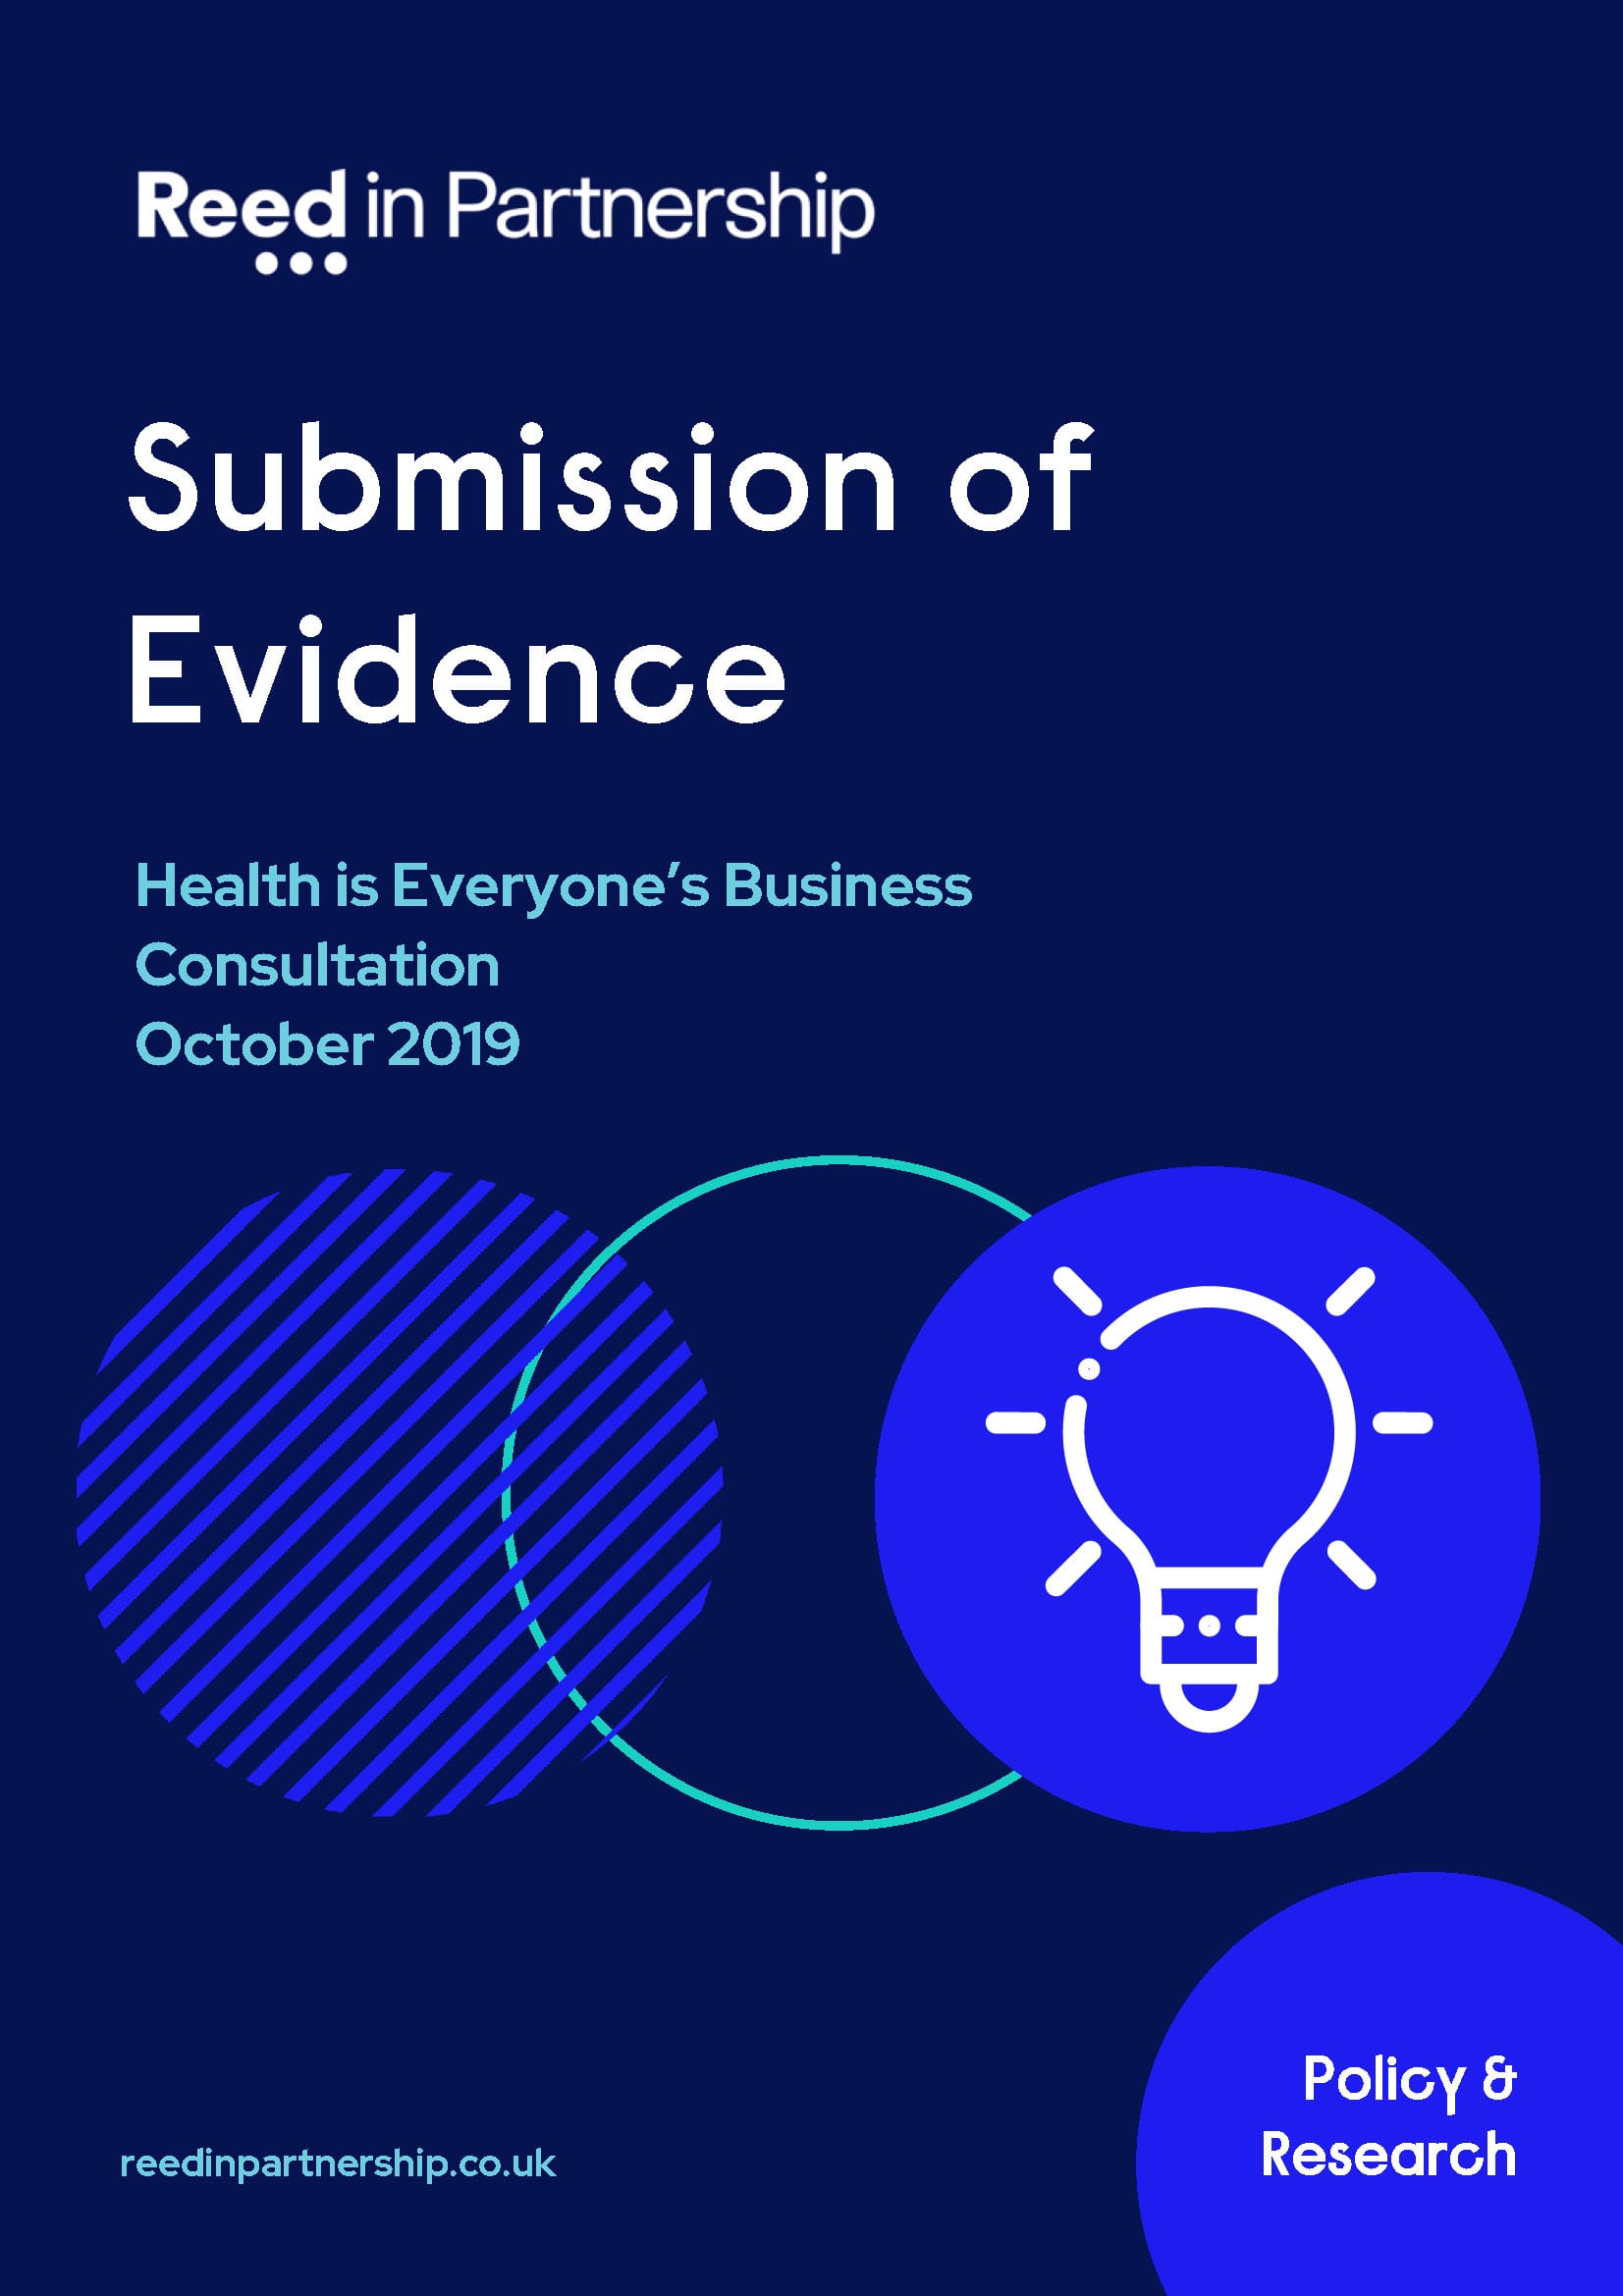 Health is Everyone's Business consultation